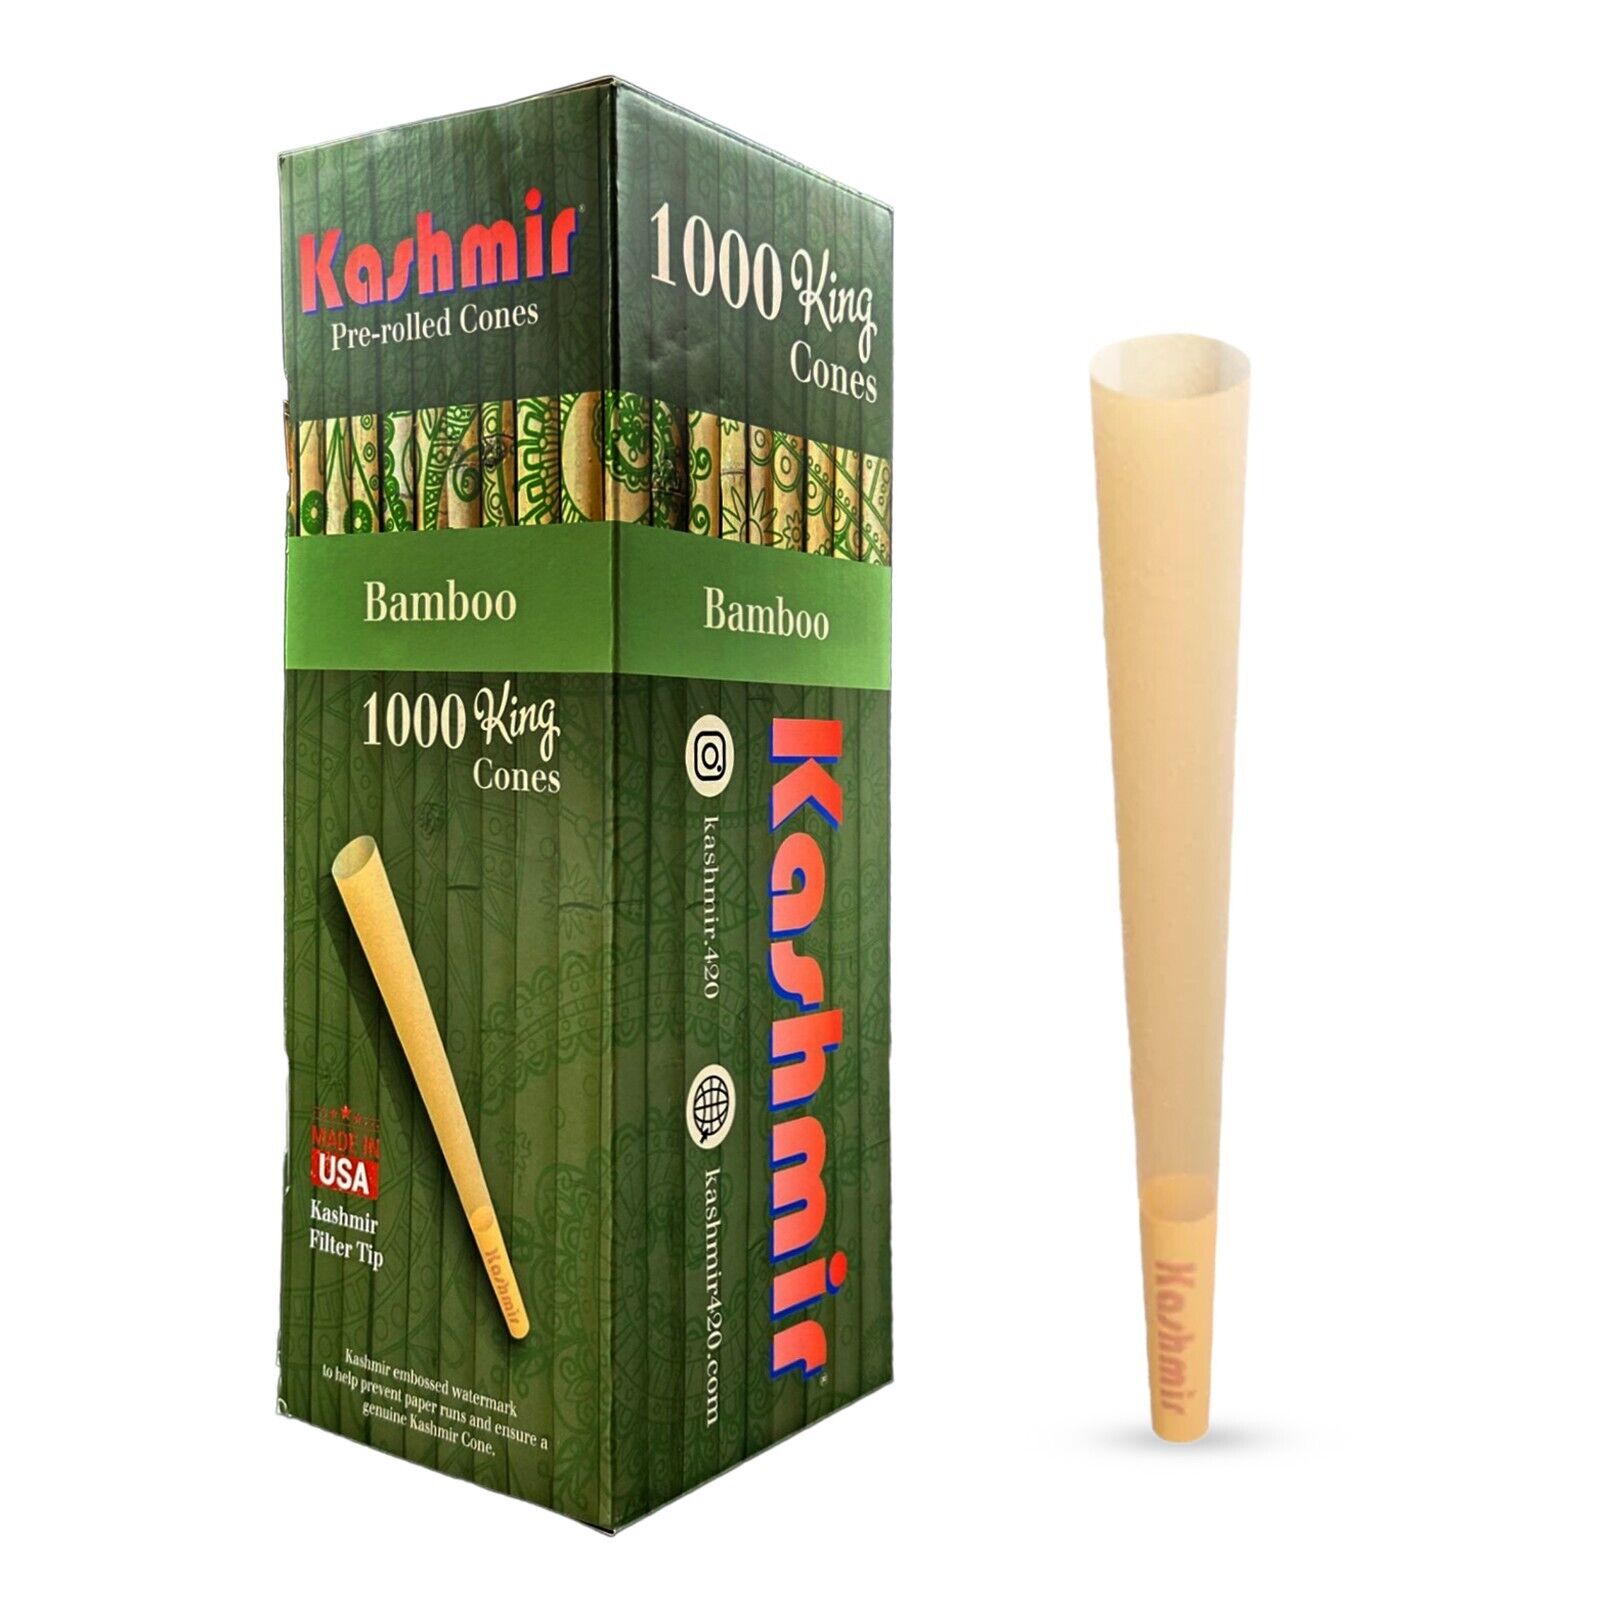 Kashmir Pre Rolled Cones 1000 King Size Bamboo Slow Burning Rolling Paper Cones